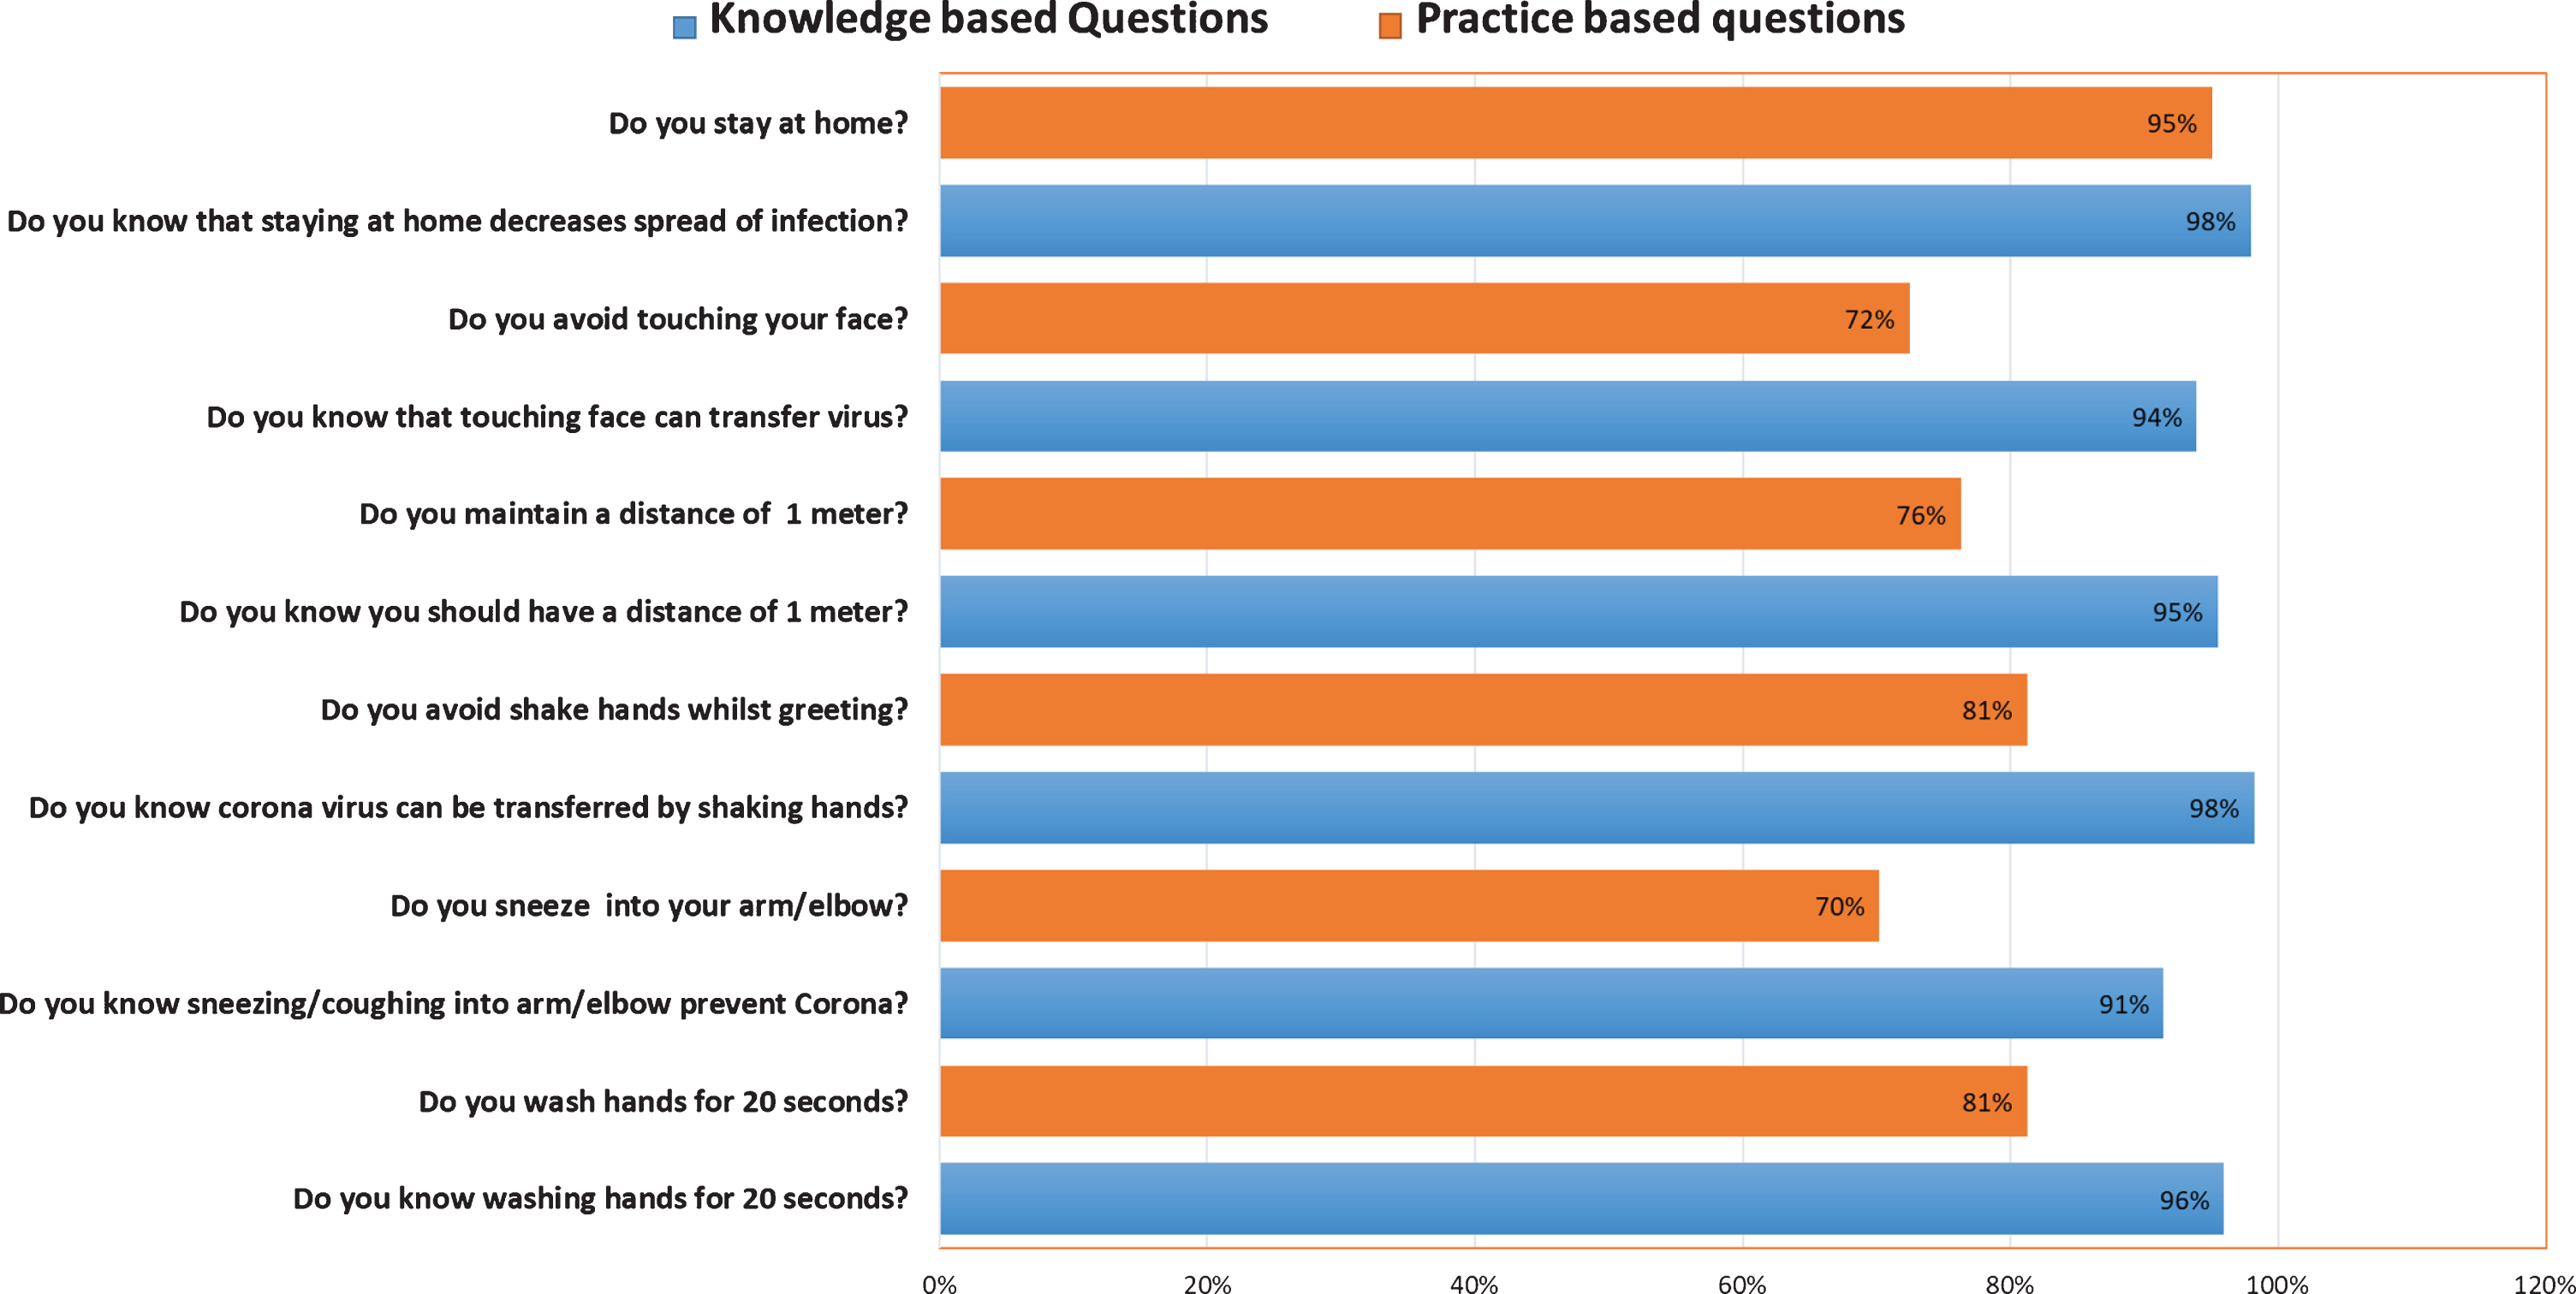 Relationship between knowledge- and practice-based questions.